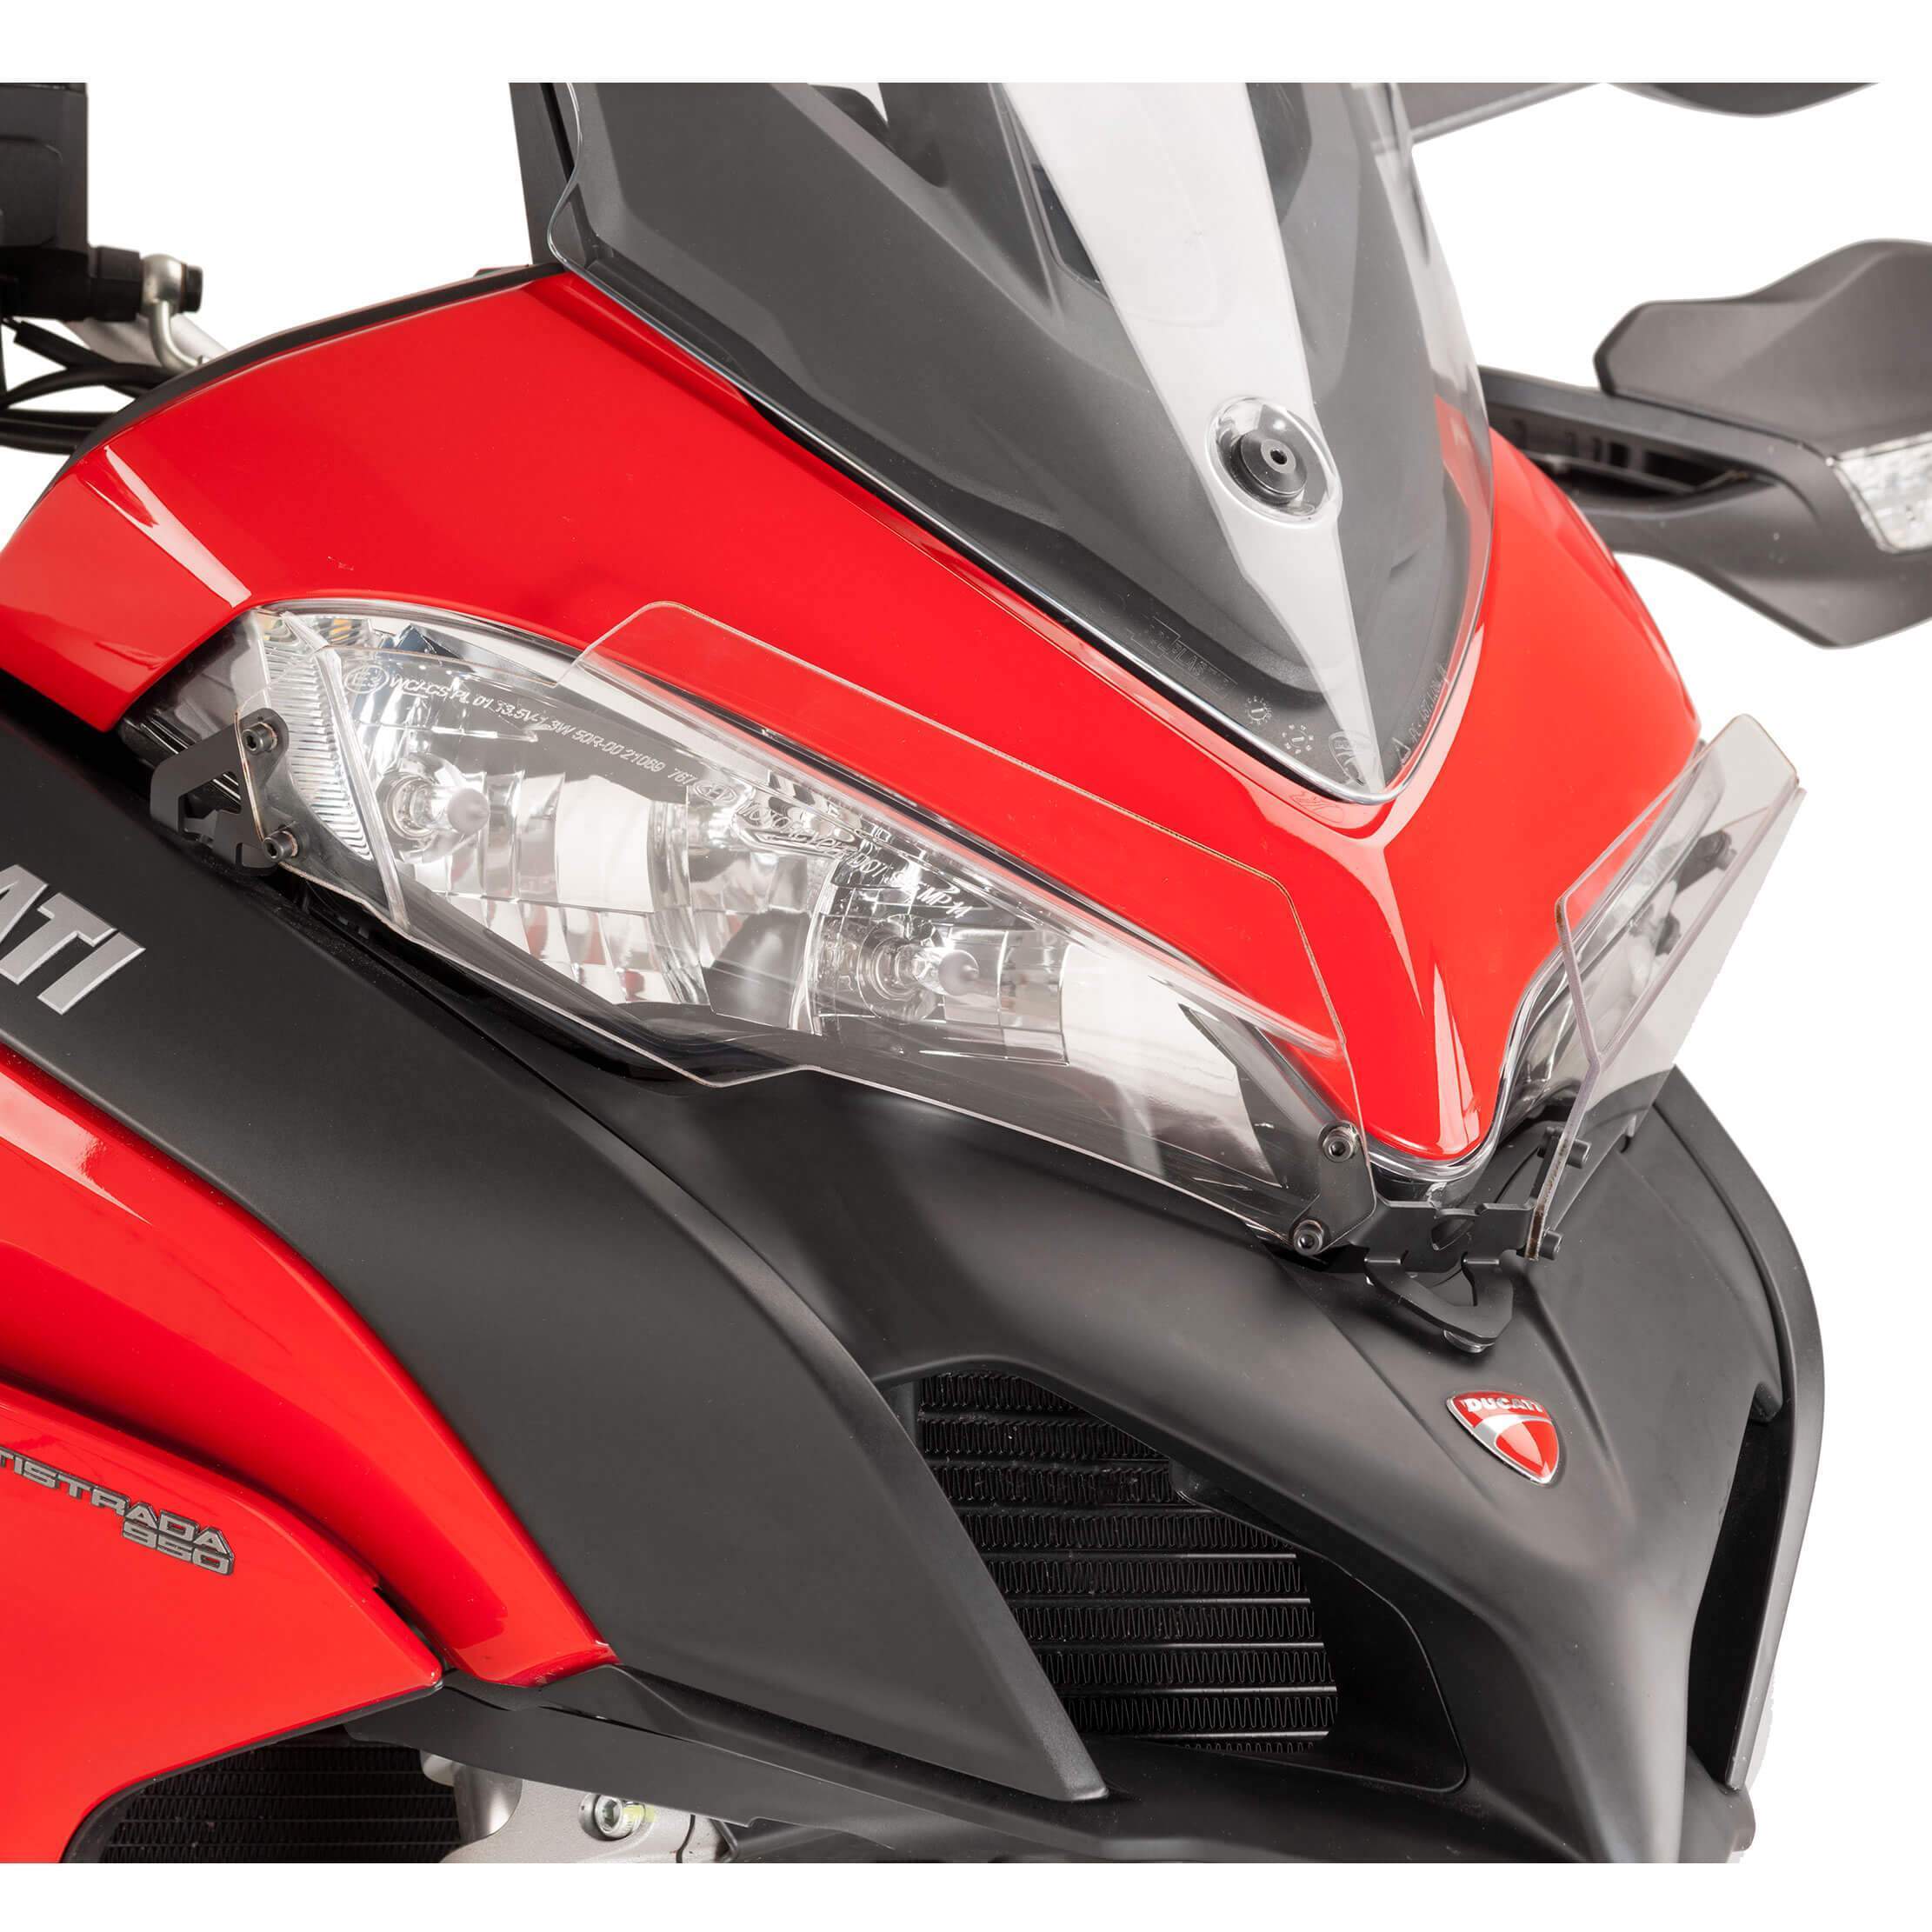 Puig Headlight Guard | Clear | Ducati Multistrada 1260 S D Air 2018>2020-M9401W-Headlight Protection-Pyramid Motorcycle Accessories